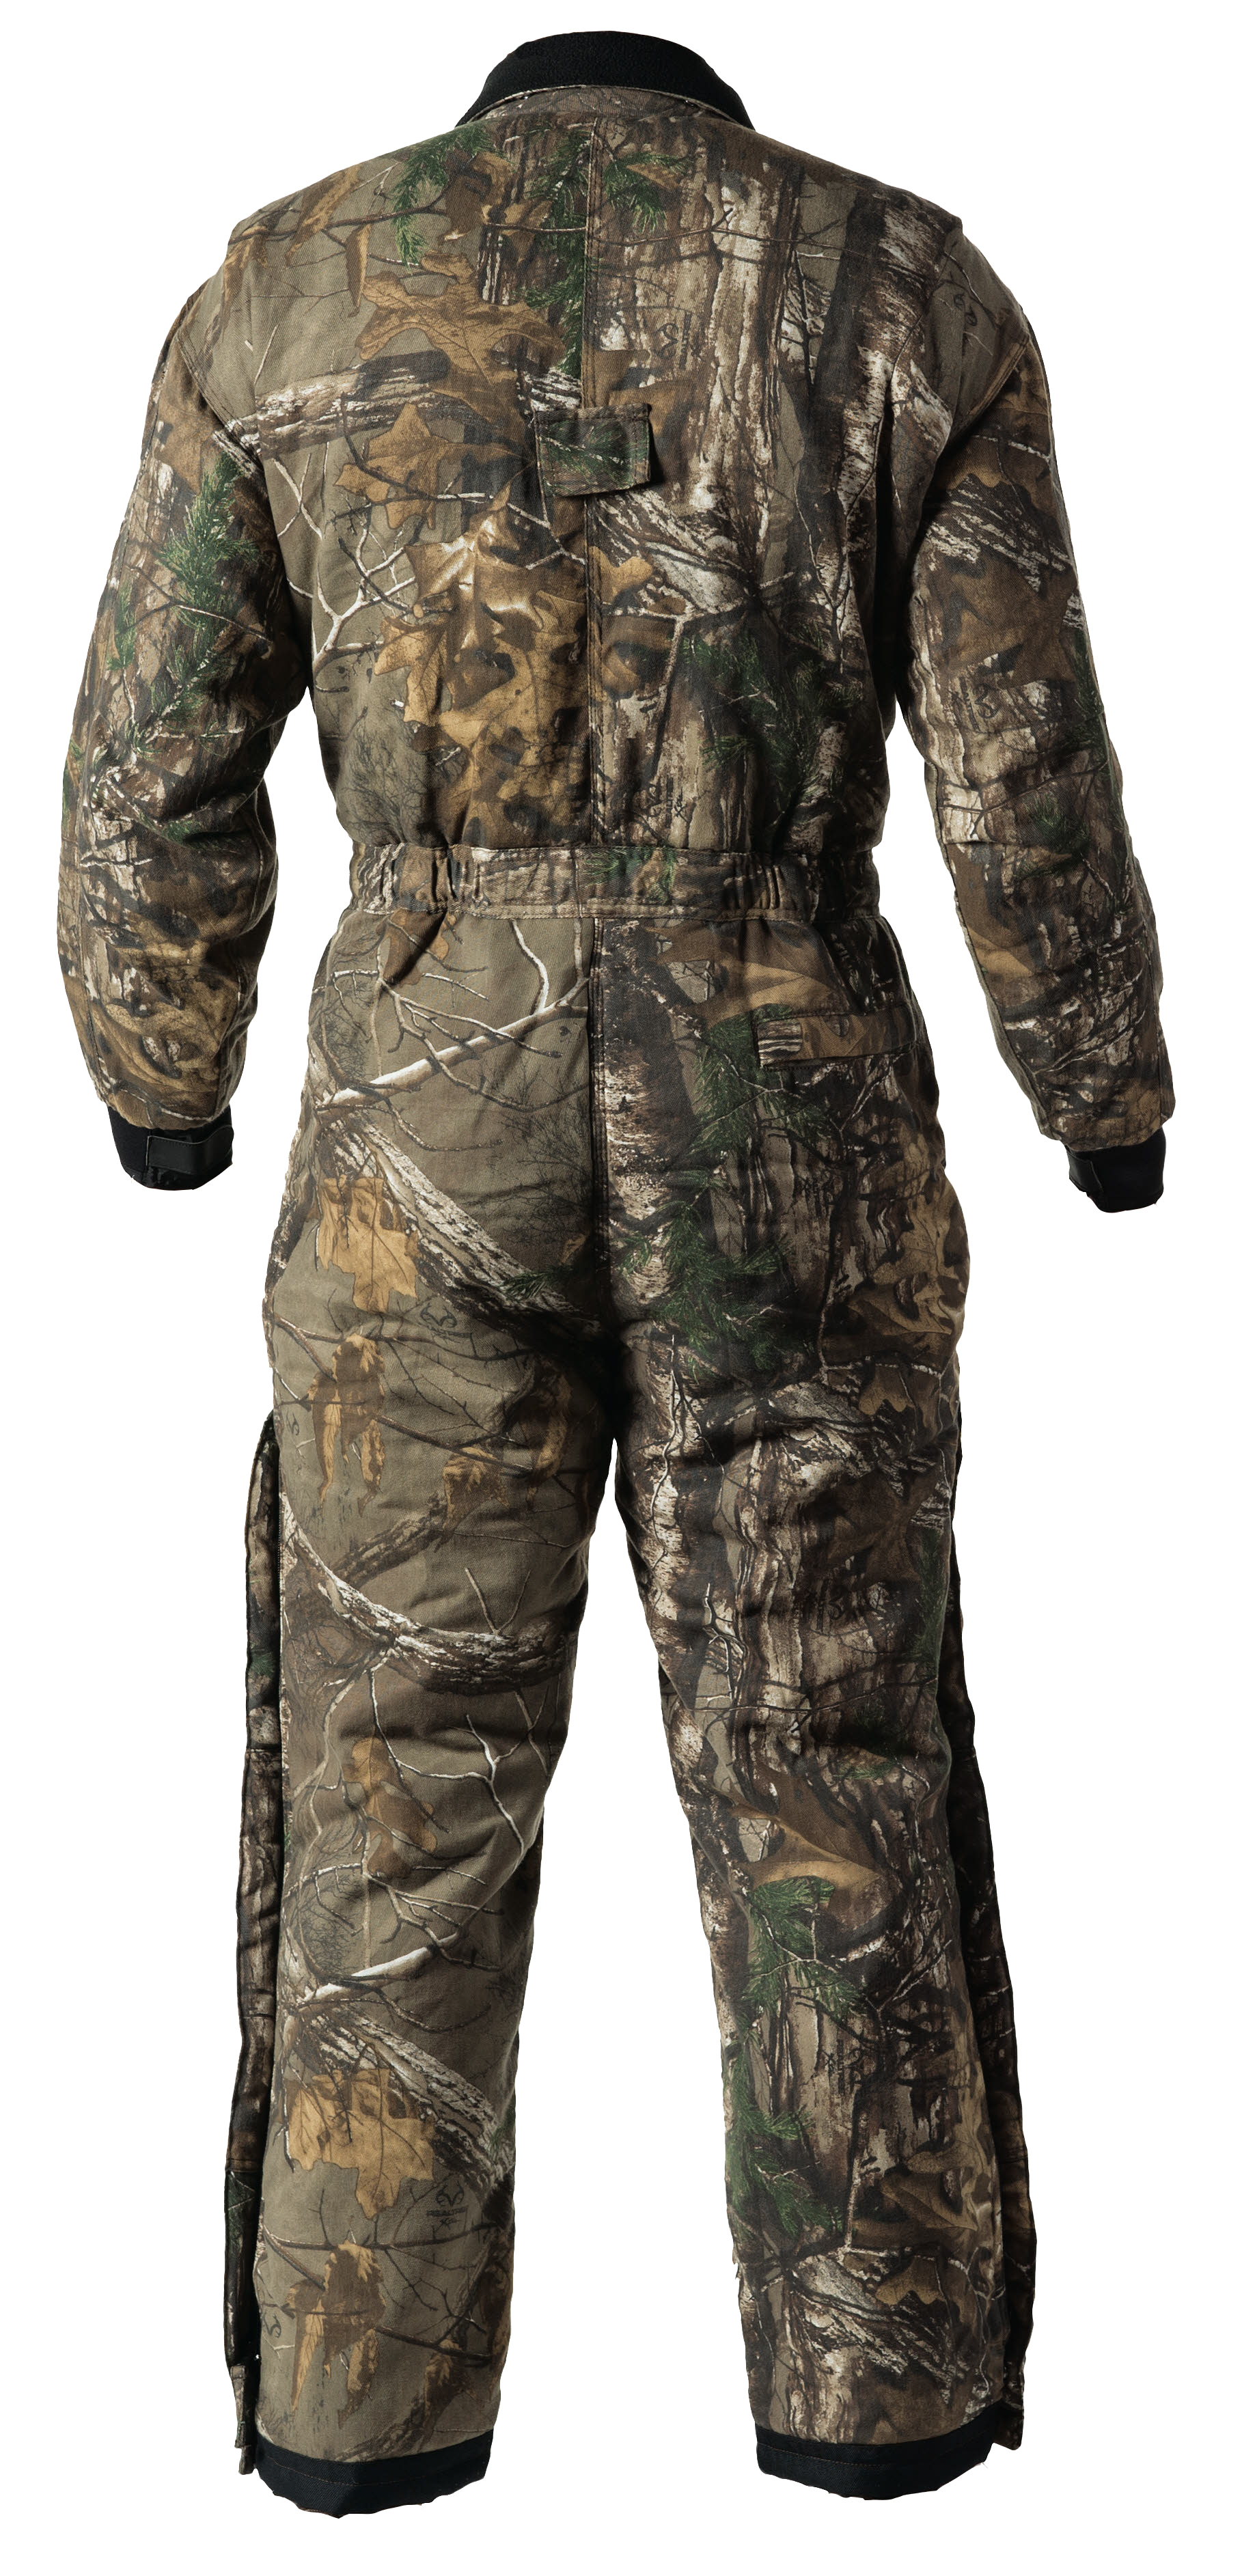 Walls Legend Coveralls in Big and Tall Sizes